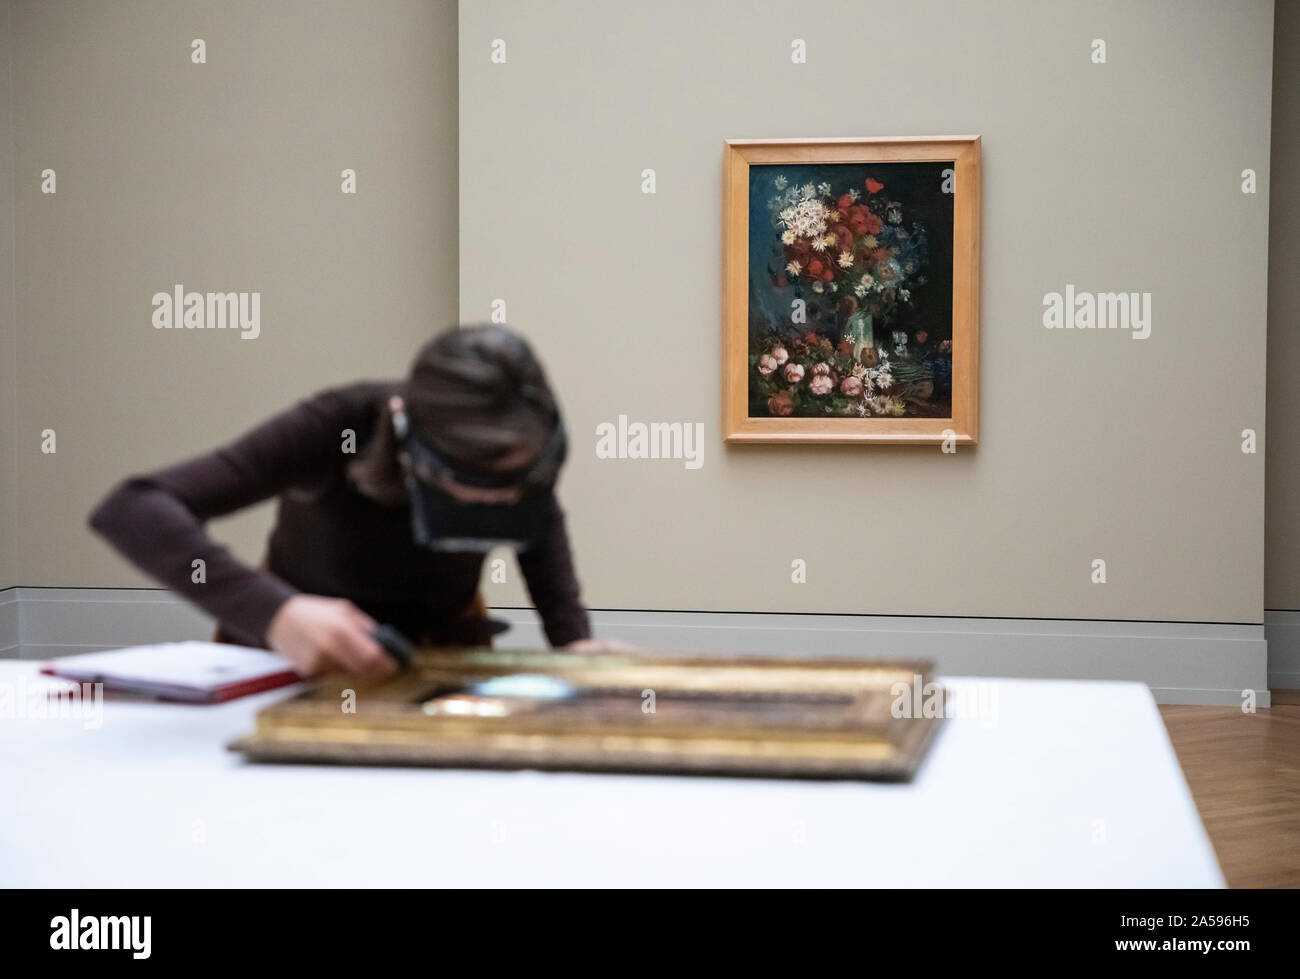 Potsdam, Germany. 18th Oct, 2019. Friederike Beseler, restorer, examines the construction of the exhibition 'Van Gogh. Stillleben' in the Barberini Museum is a painting by Vincent van Gogh, while behind it is the work 'Stillleben mit Wiesenblumen und Rosen, 1886/87'. The exhibition runs from 26 October 2019 to 2 February 2020. Credit: Christoph Soeder/dpa/Alamy Live News Stock Photo